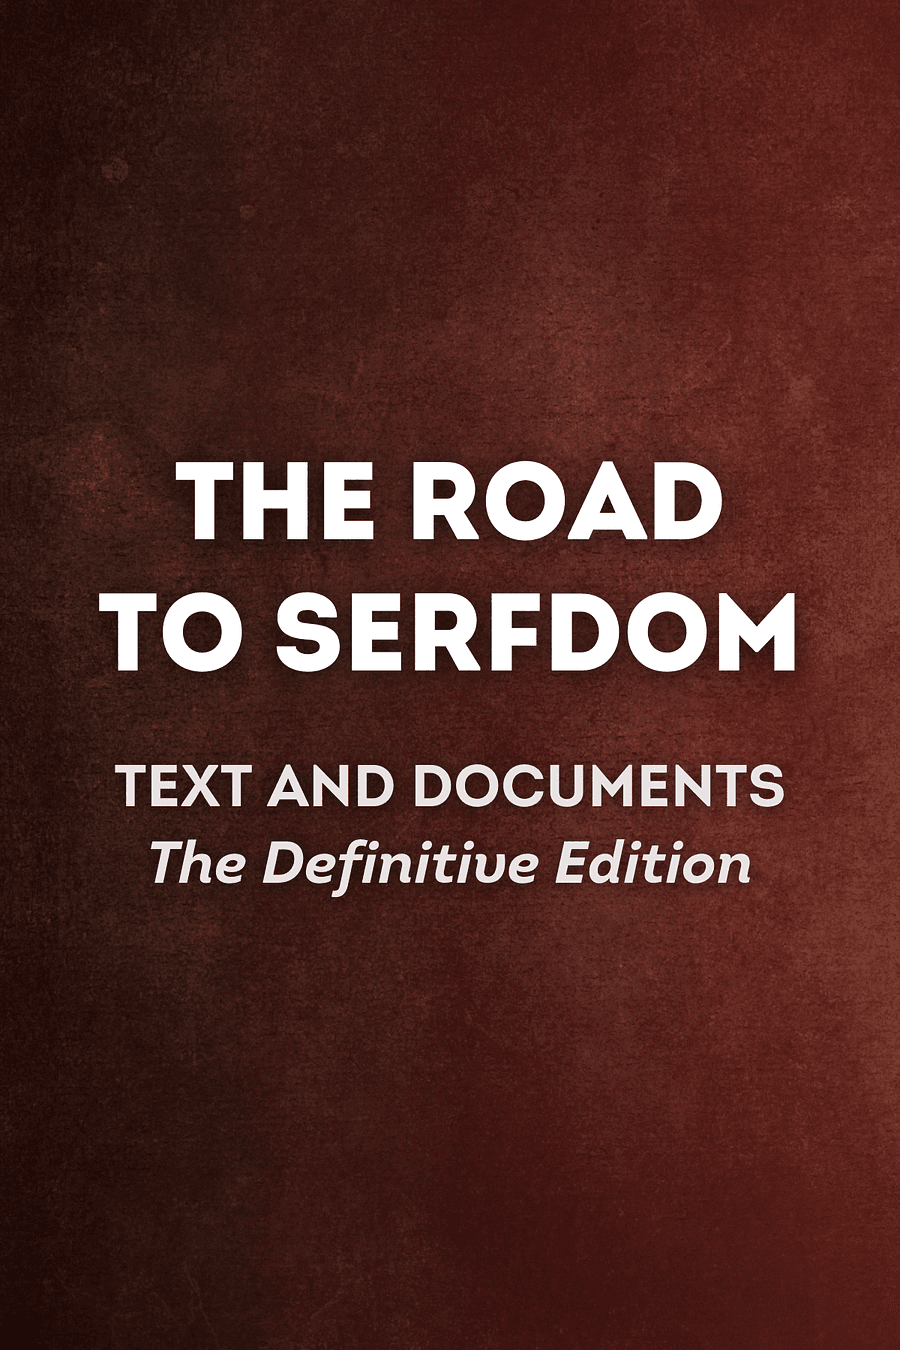 The Road to Serfdom by F. A. Hayek - Book Summary